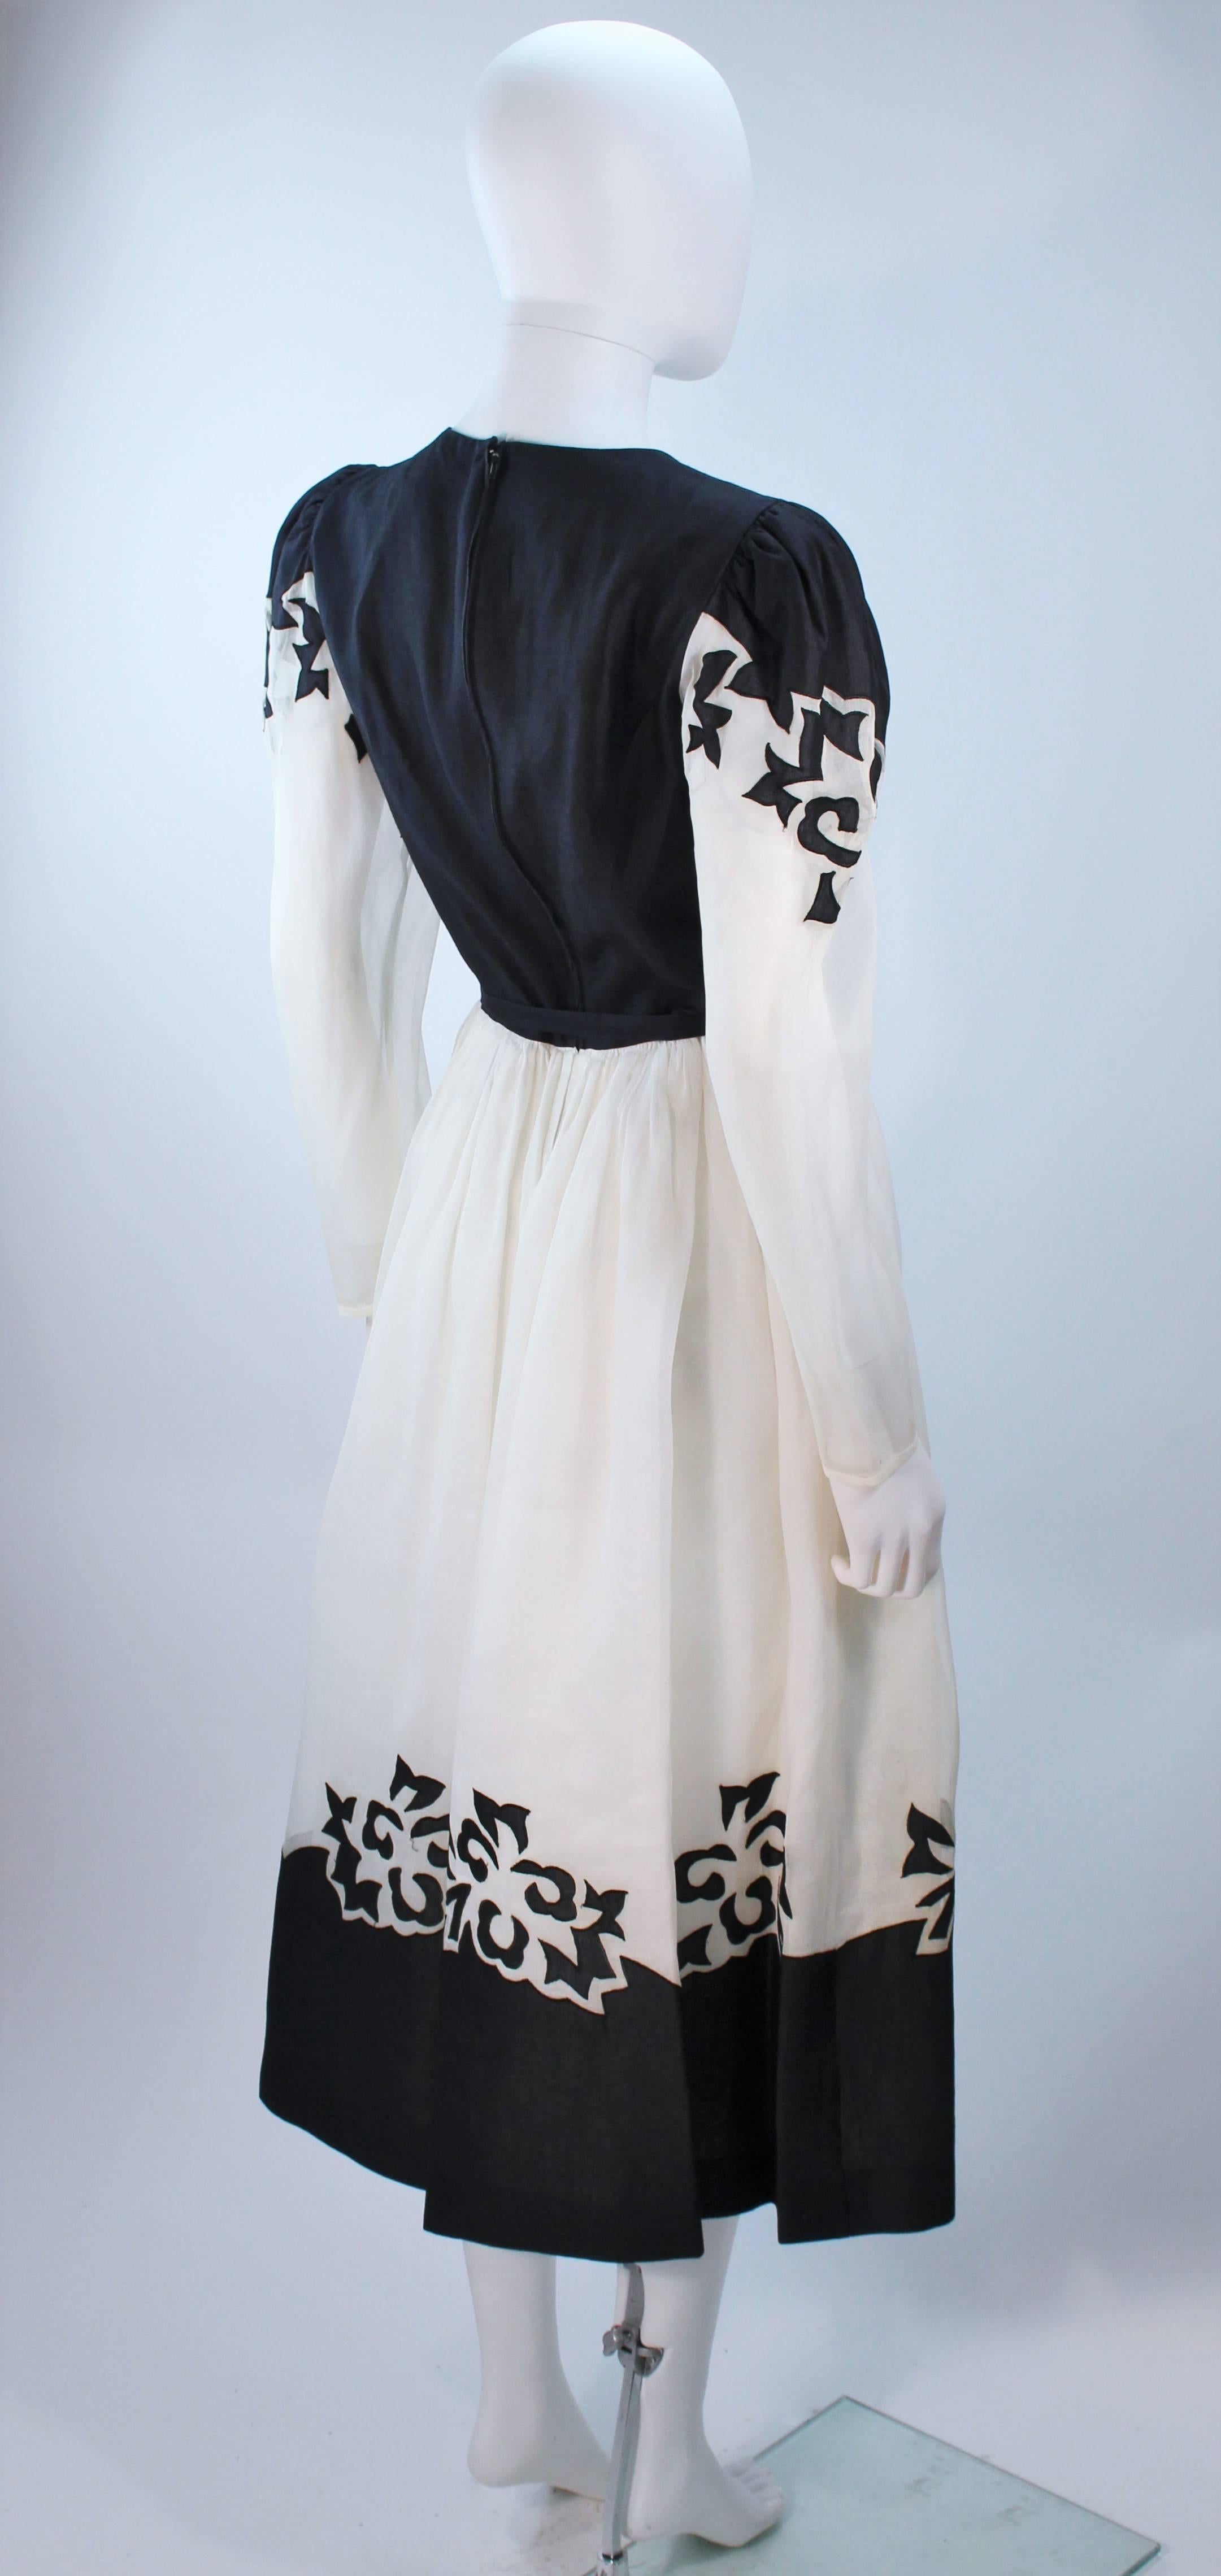 ALBERT NIPON Black and White Cocktail Dress with Floral Applique Size 2-4 3